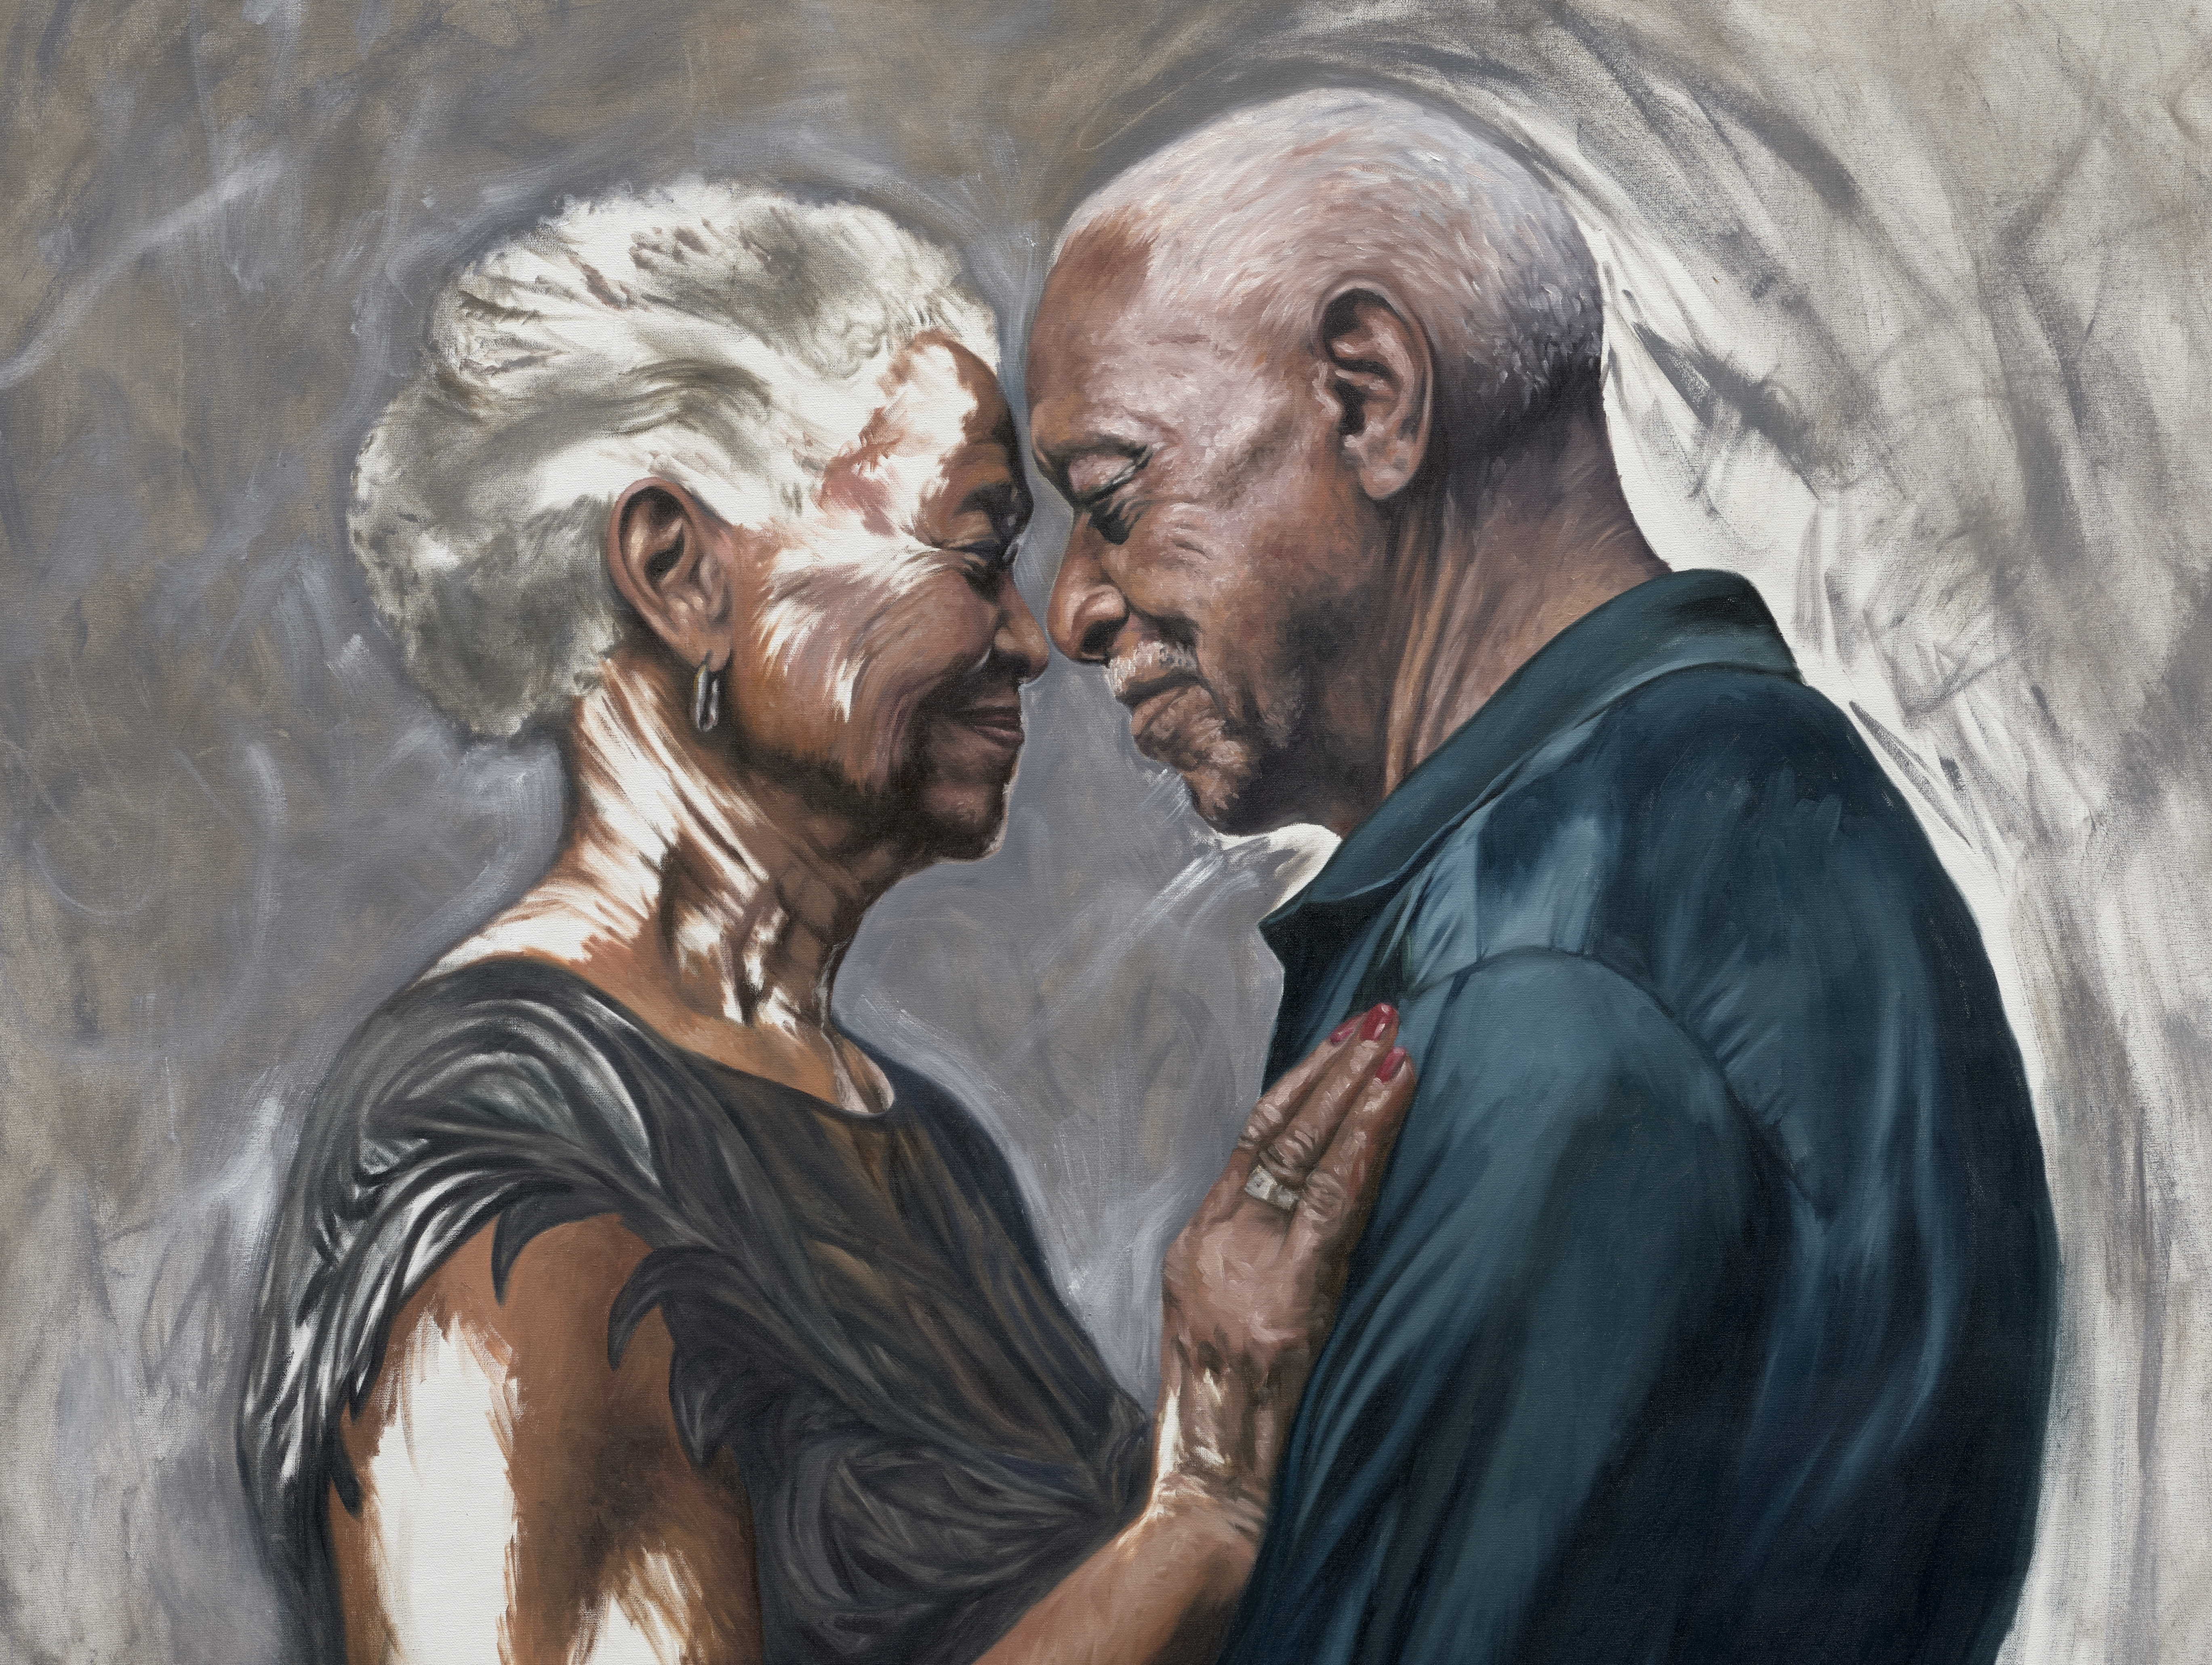 A painting of an older black man and woman in an embrace where her hands are on his chest and their foreheads are touching